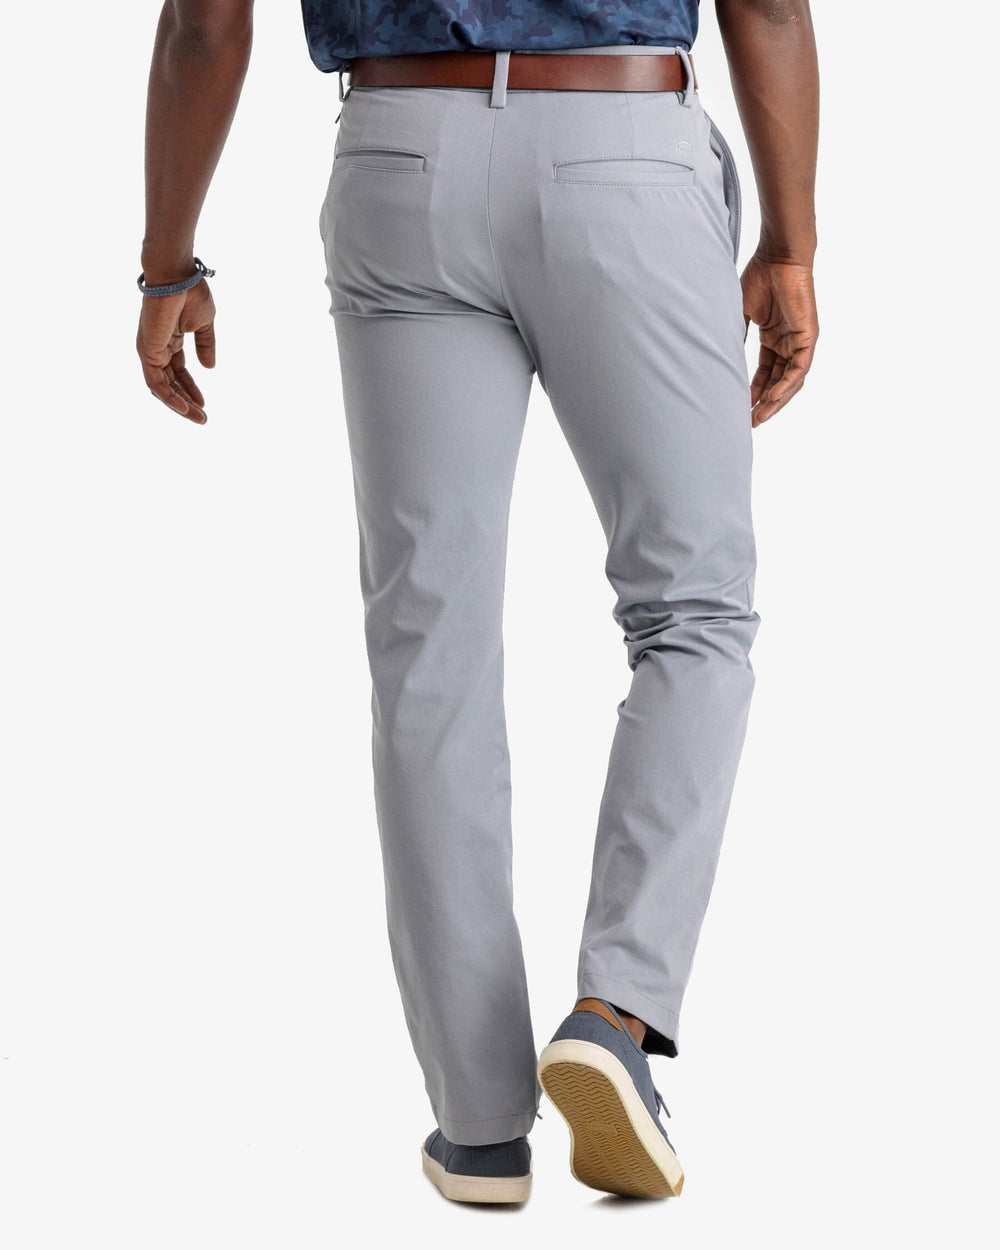 The back view of the Southern Tide Jack Performance Pant by Southern Tide - Steel Grey